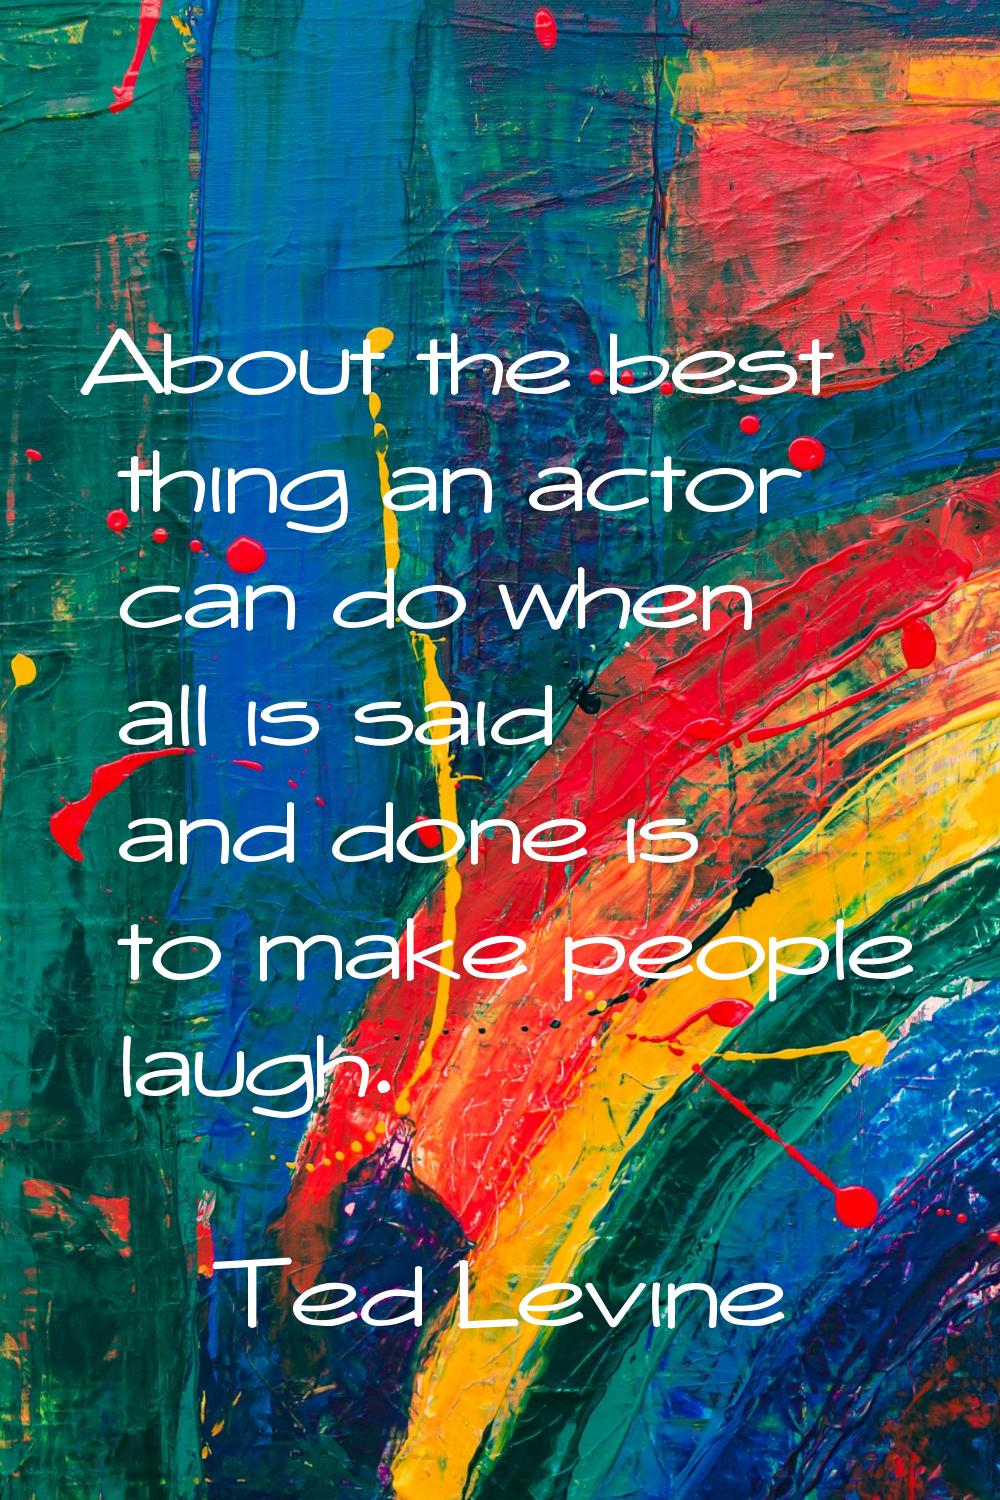 About the best thing an actor can do when all is said and done is to make people laugh.